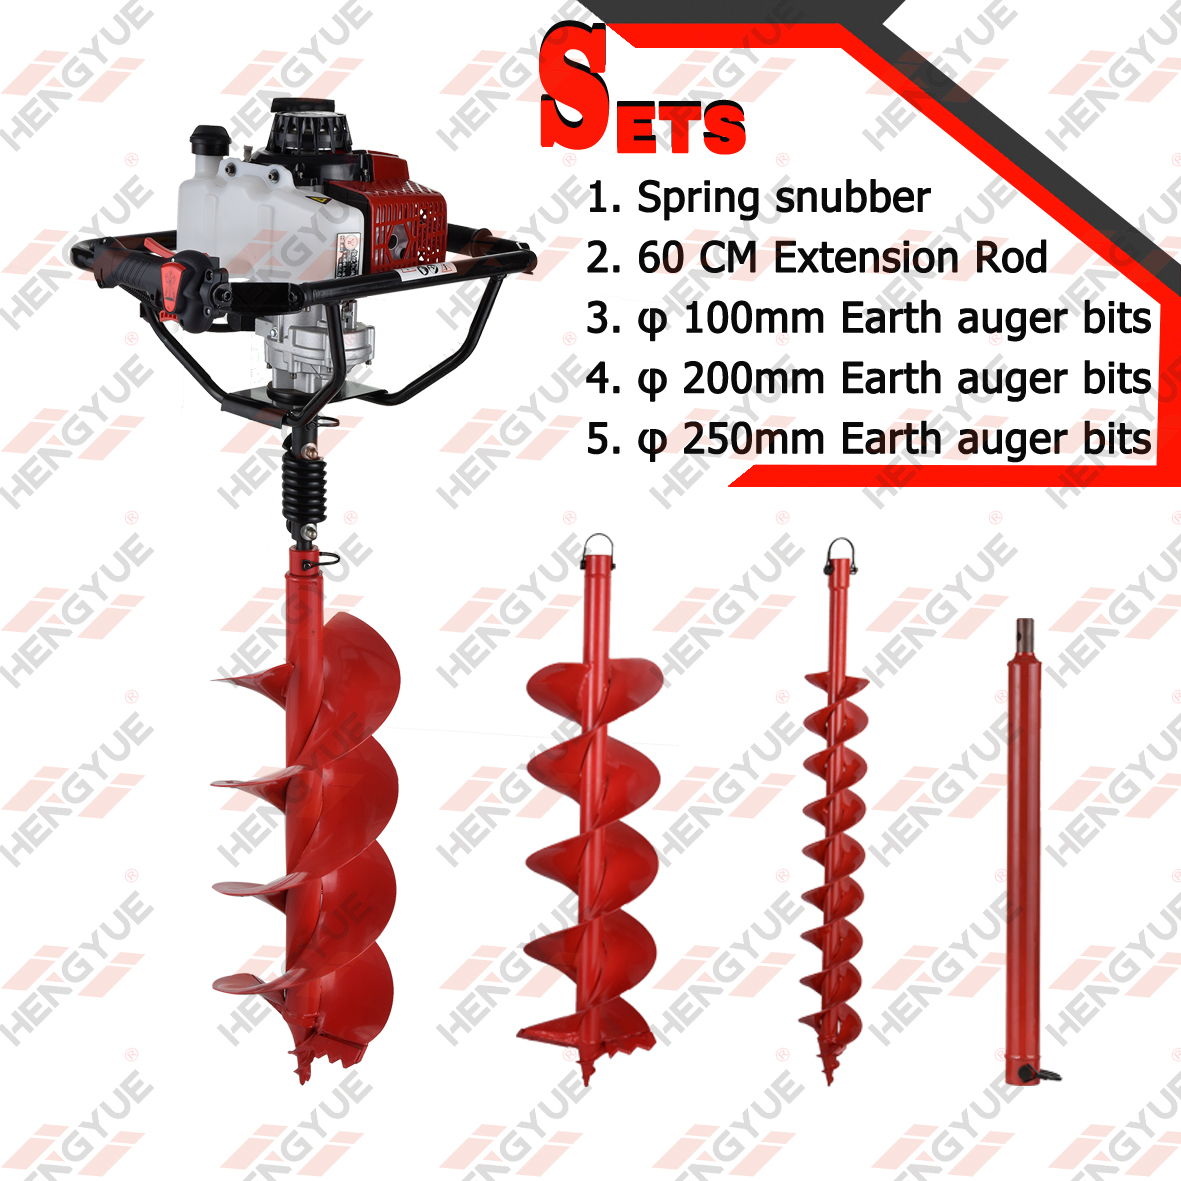 63/68cc 2 Stroke Engine Powered Earth Auger 